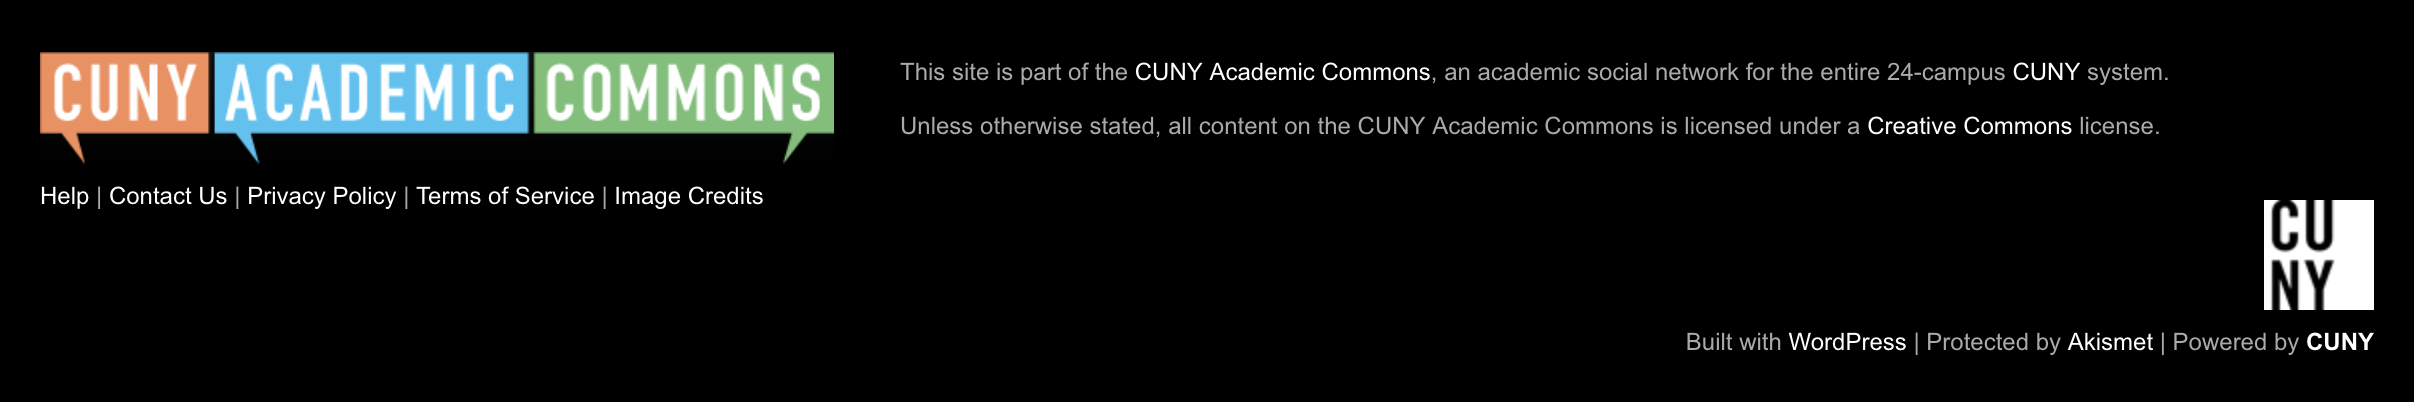 cuny-footer-option-1_size-3.png